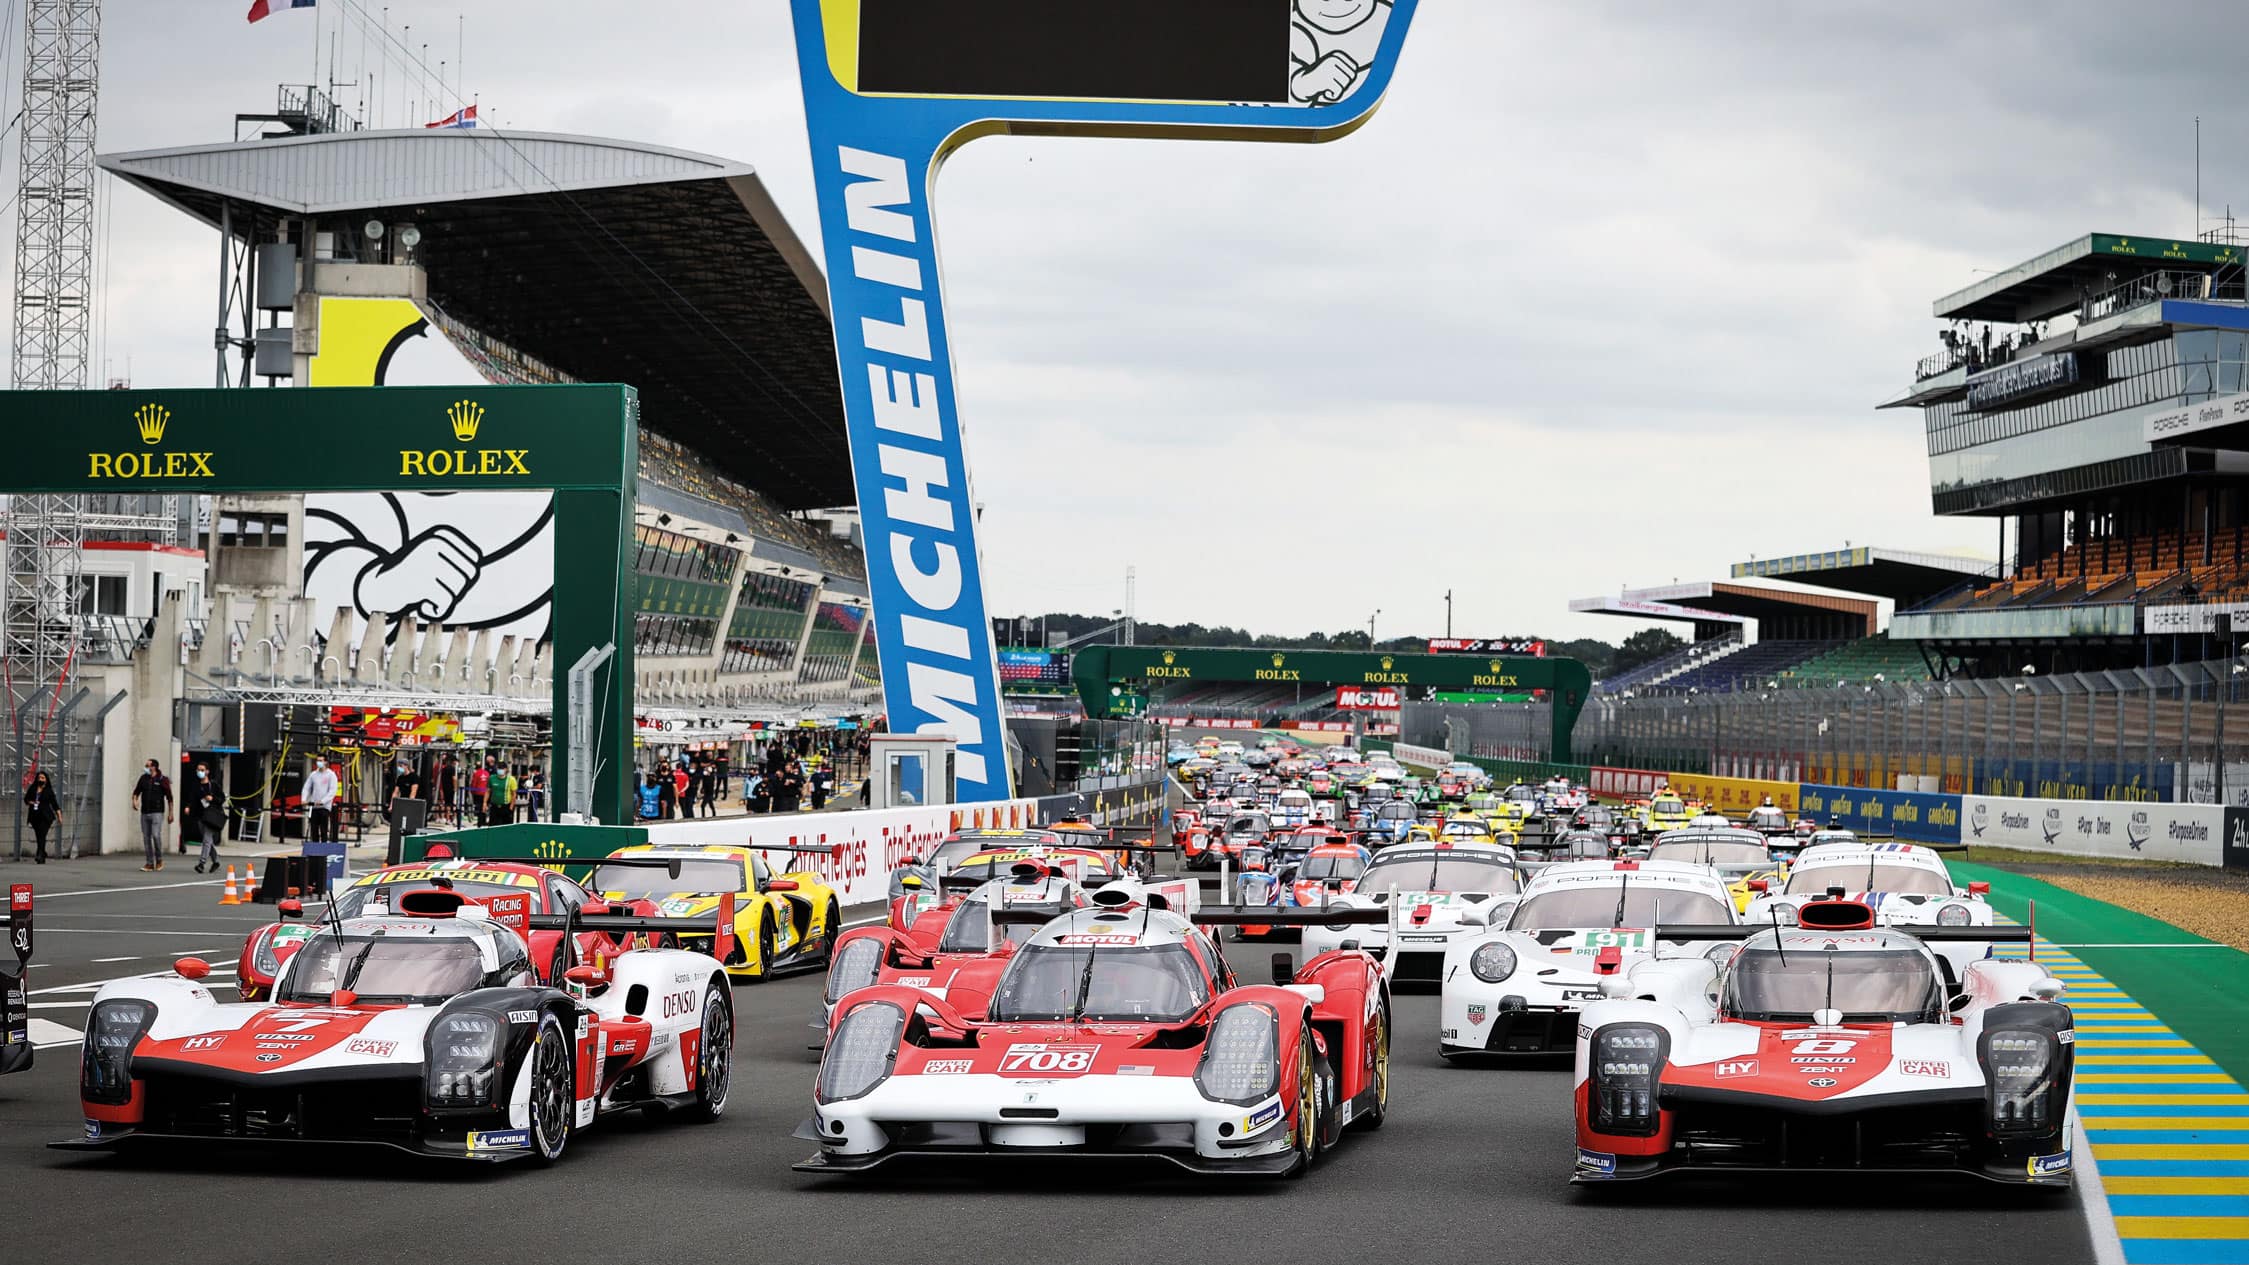 2023 24 Hours of Le Mans – Everything you need to know about the Hypercar  class